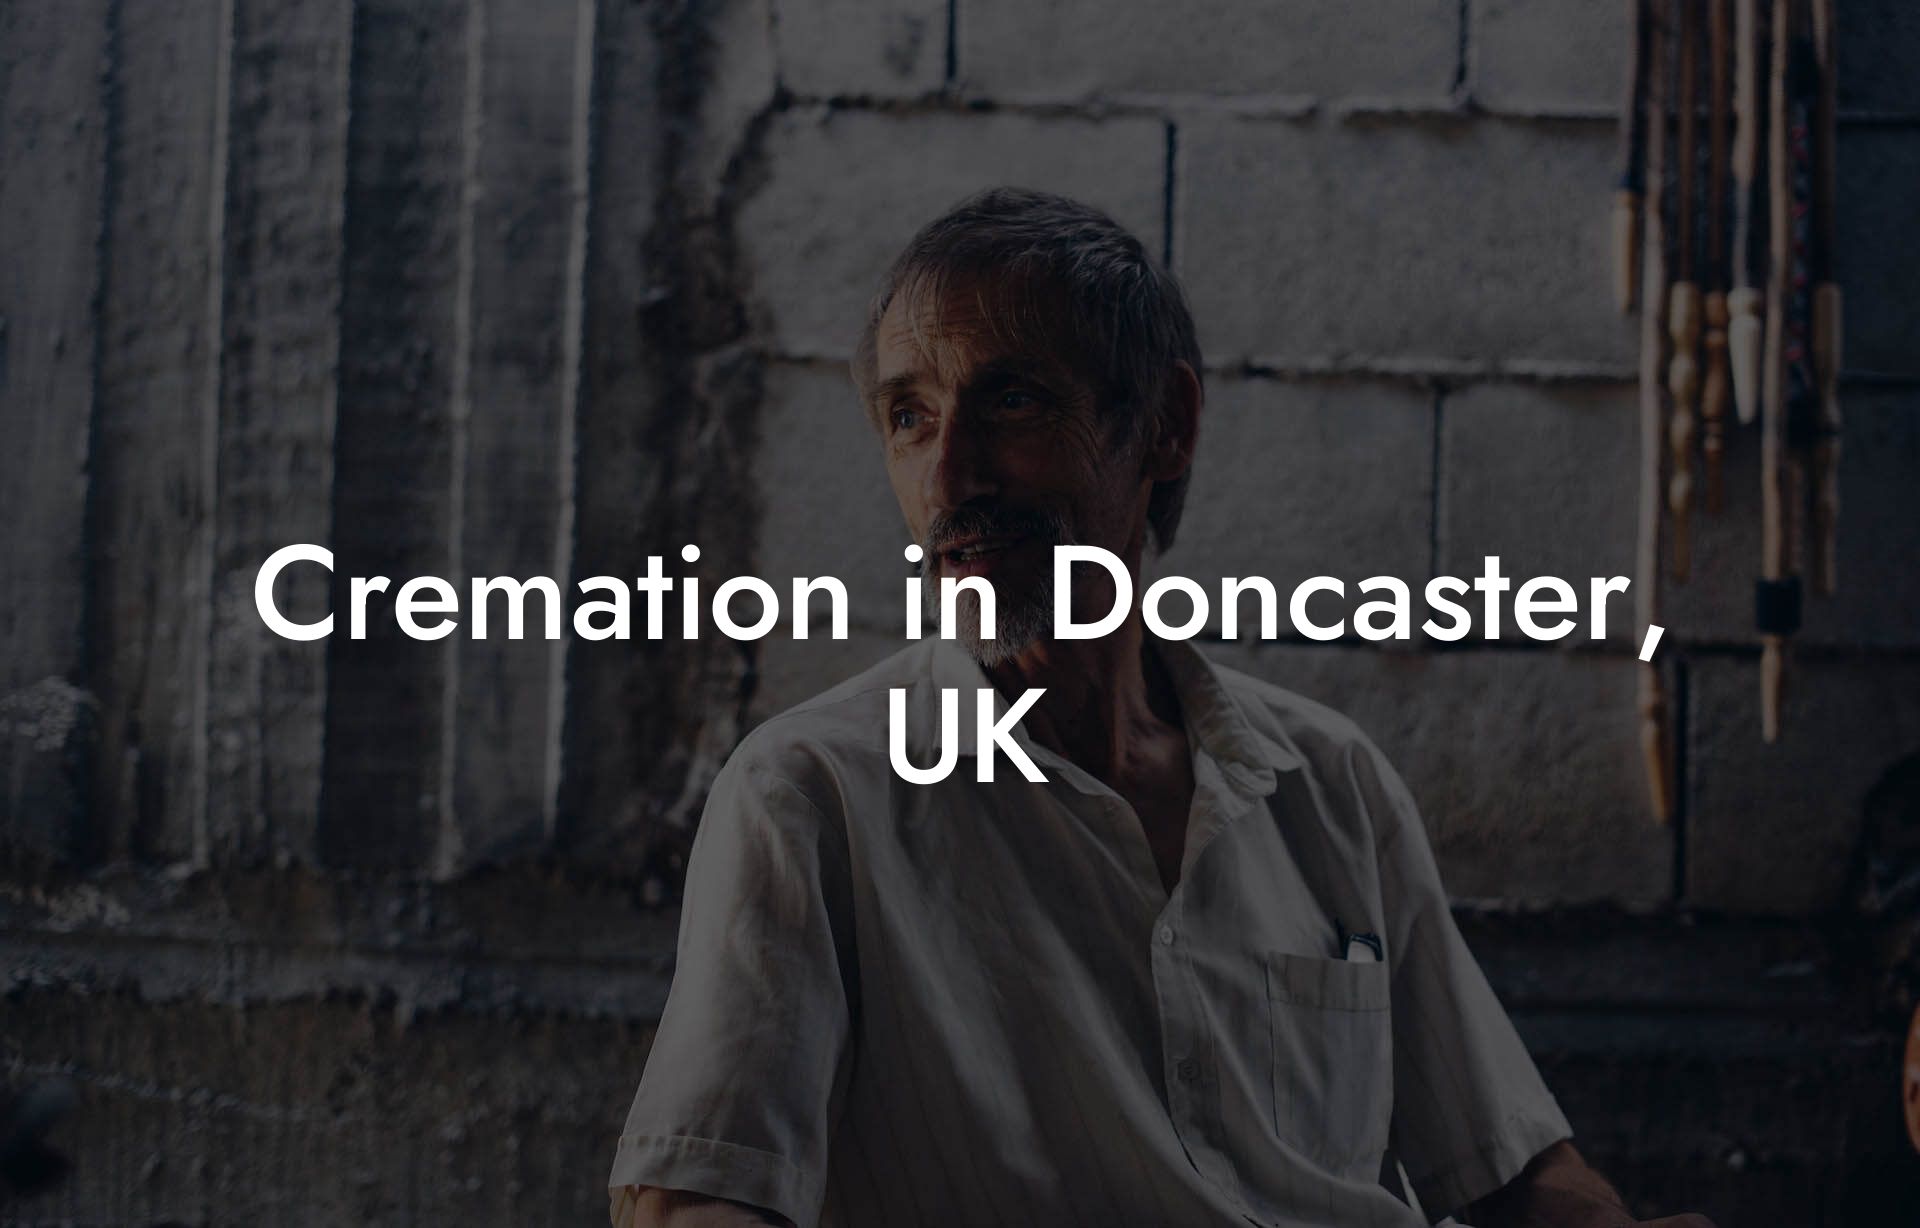 Cremation in Doncaster, UK